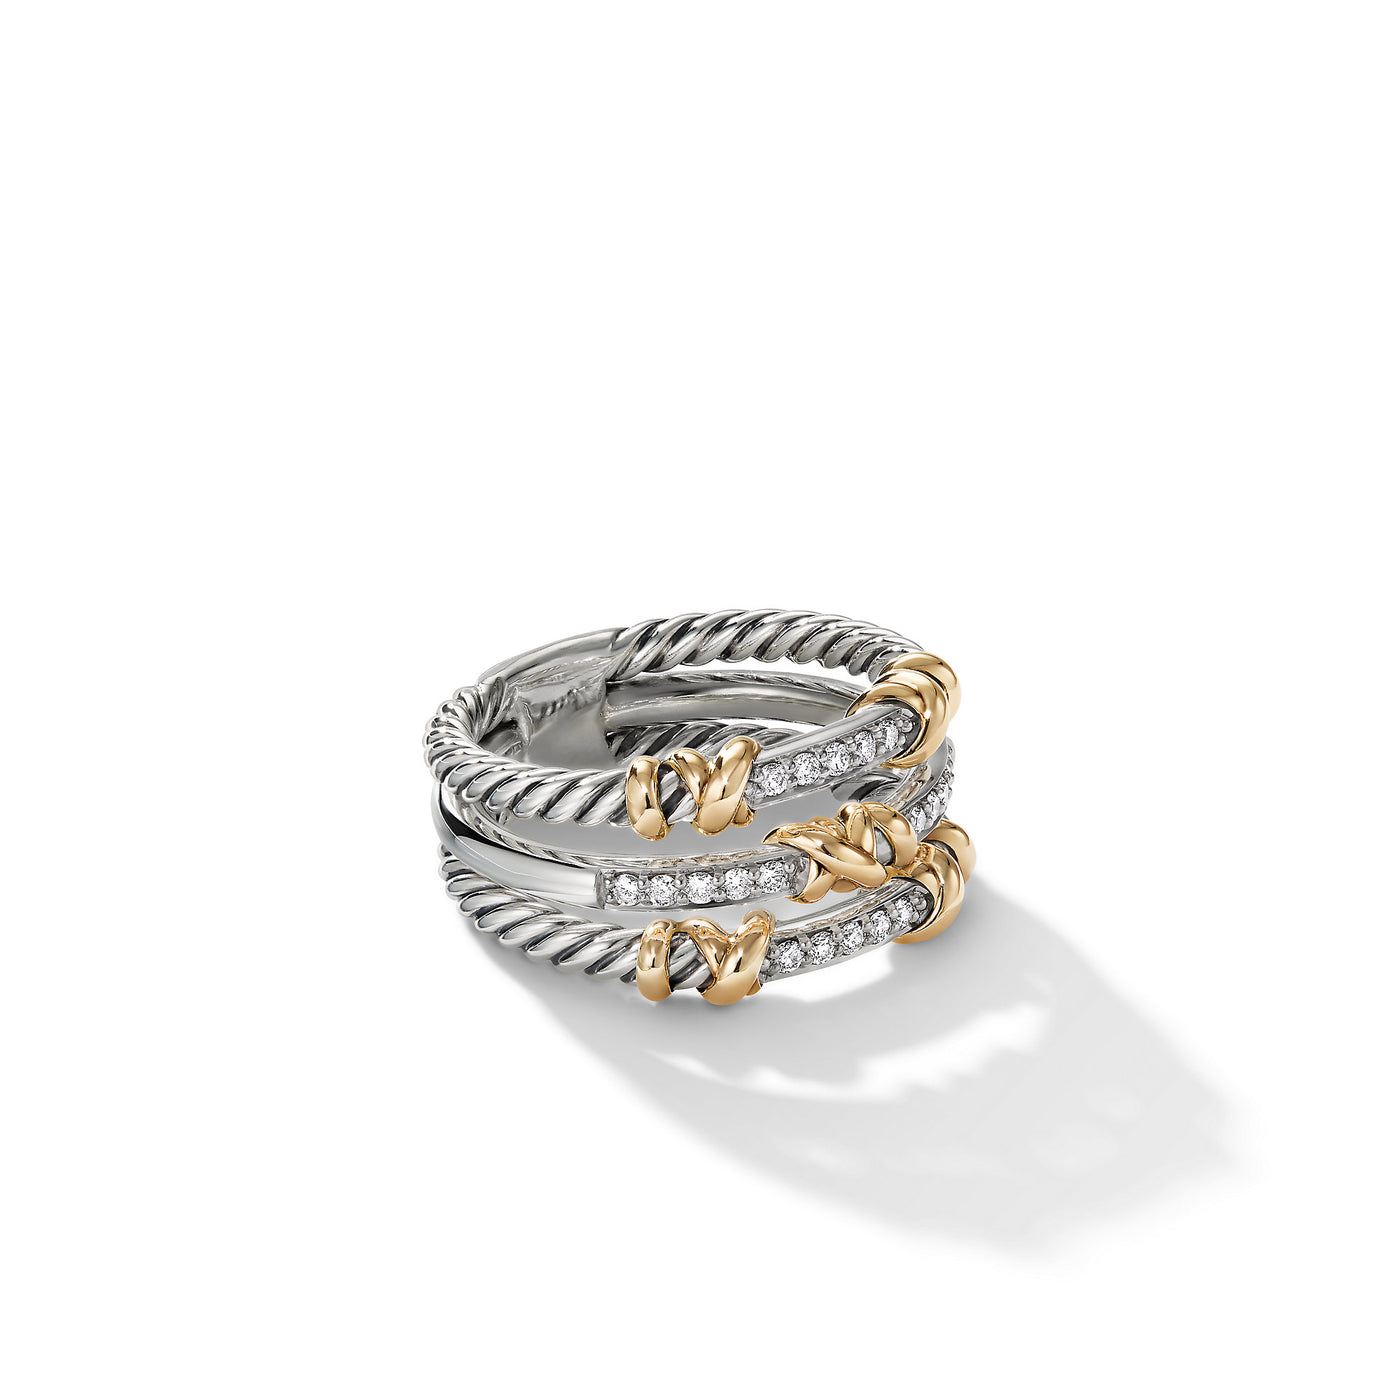 Petite Helena Wrap Three Row Ring in Sterling Silver with 18K Yellow Gold and Diamonds\, 12mm